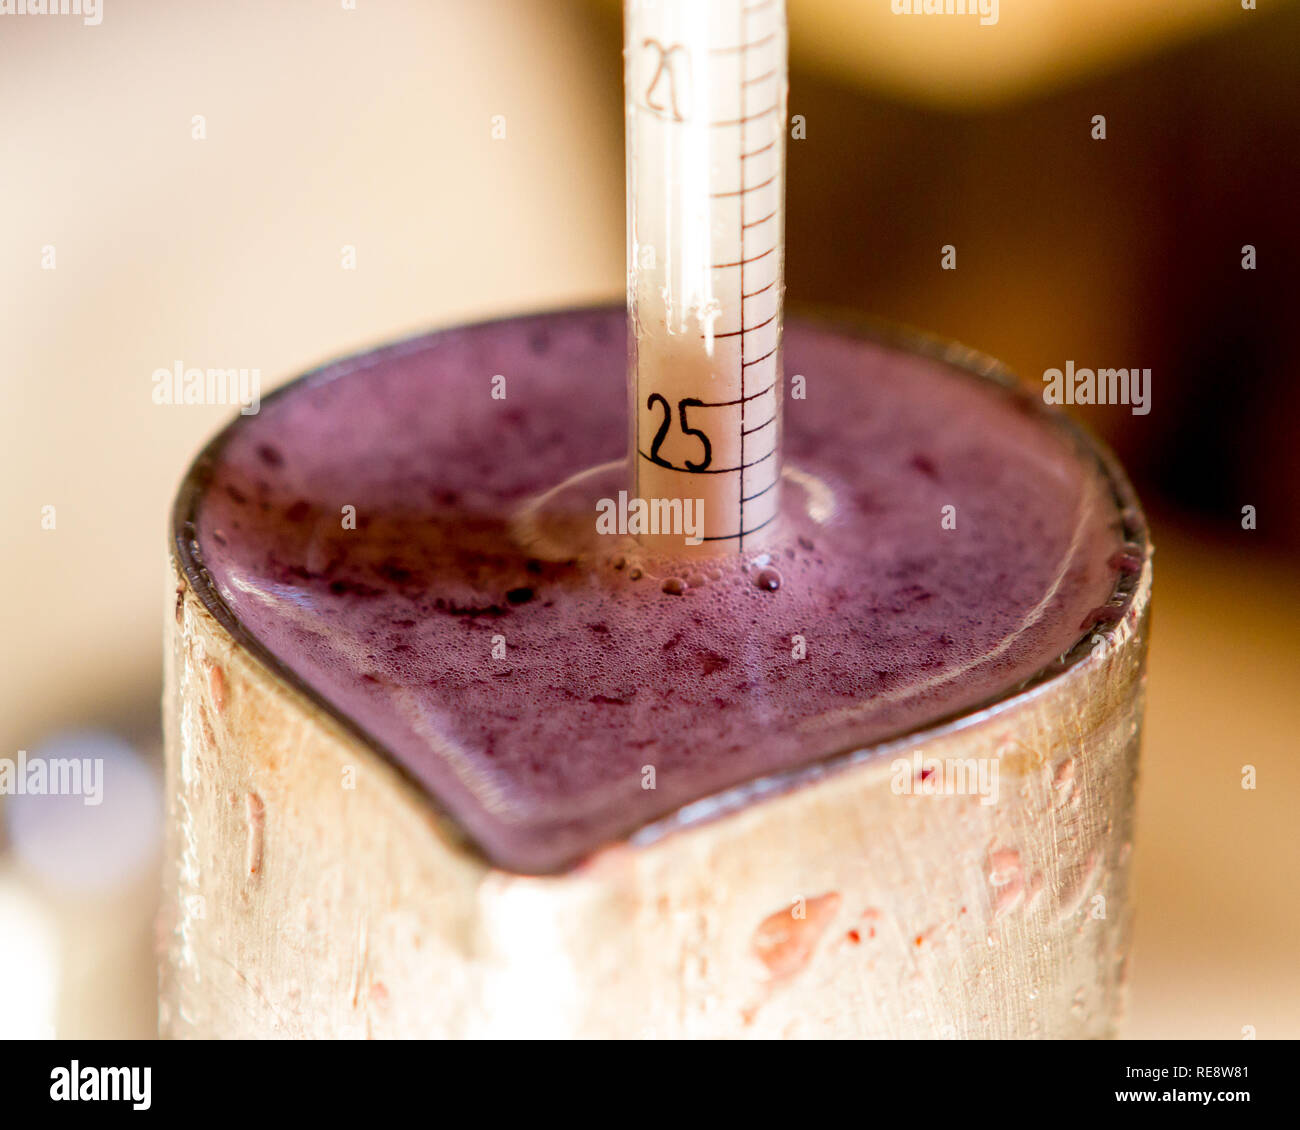 Measuring sugar content (% Brix) of newly harvested and crushed wine grape juice using a hydrometer. Healdsburg, California, USA Stock Photo